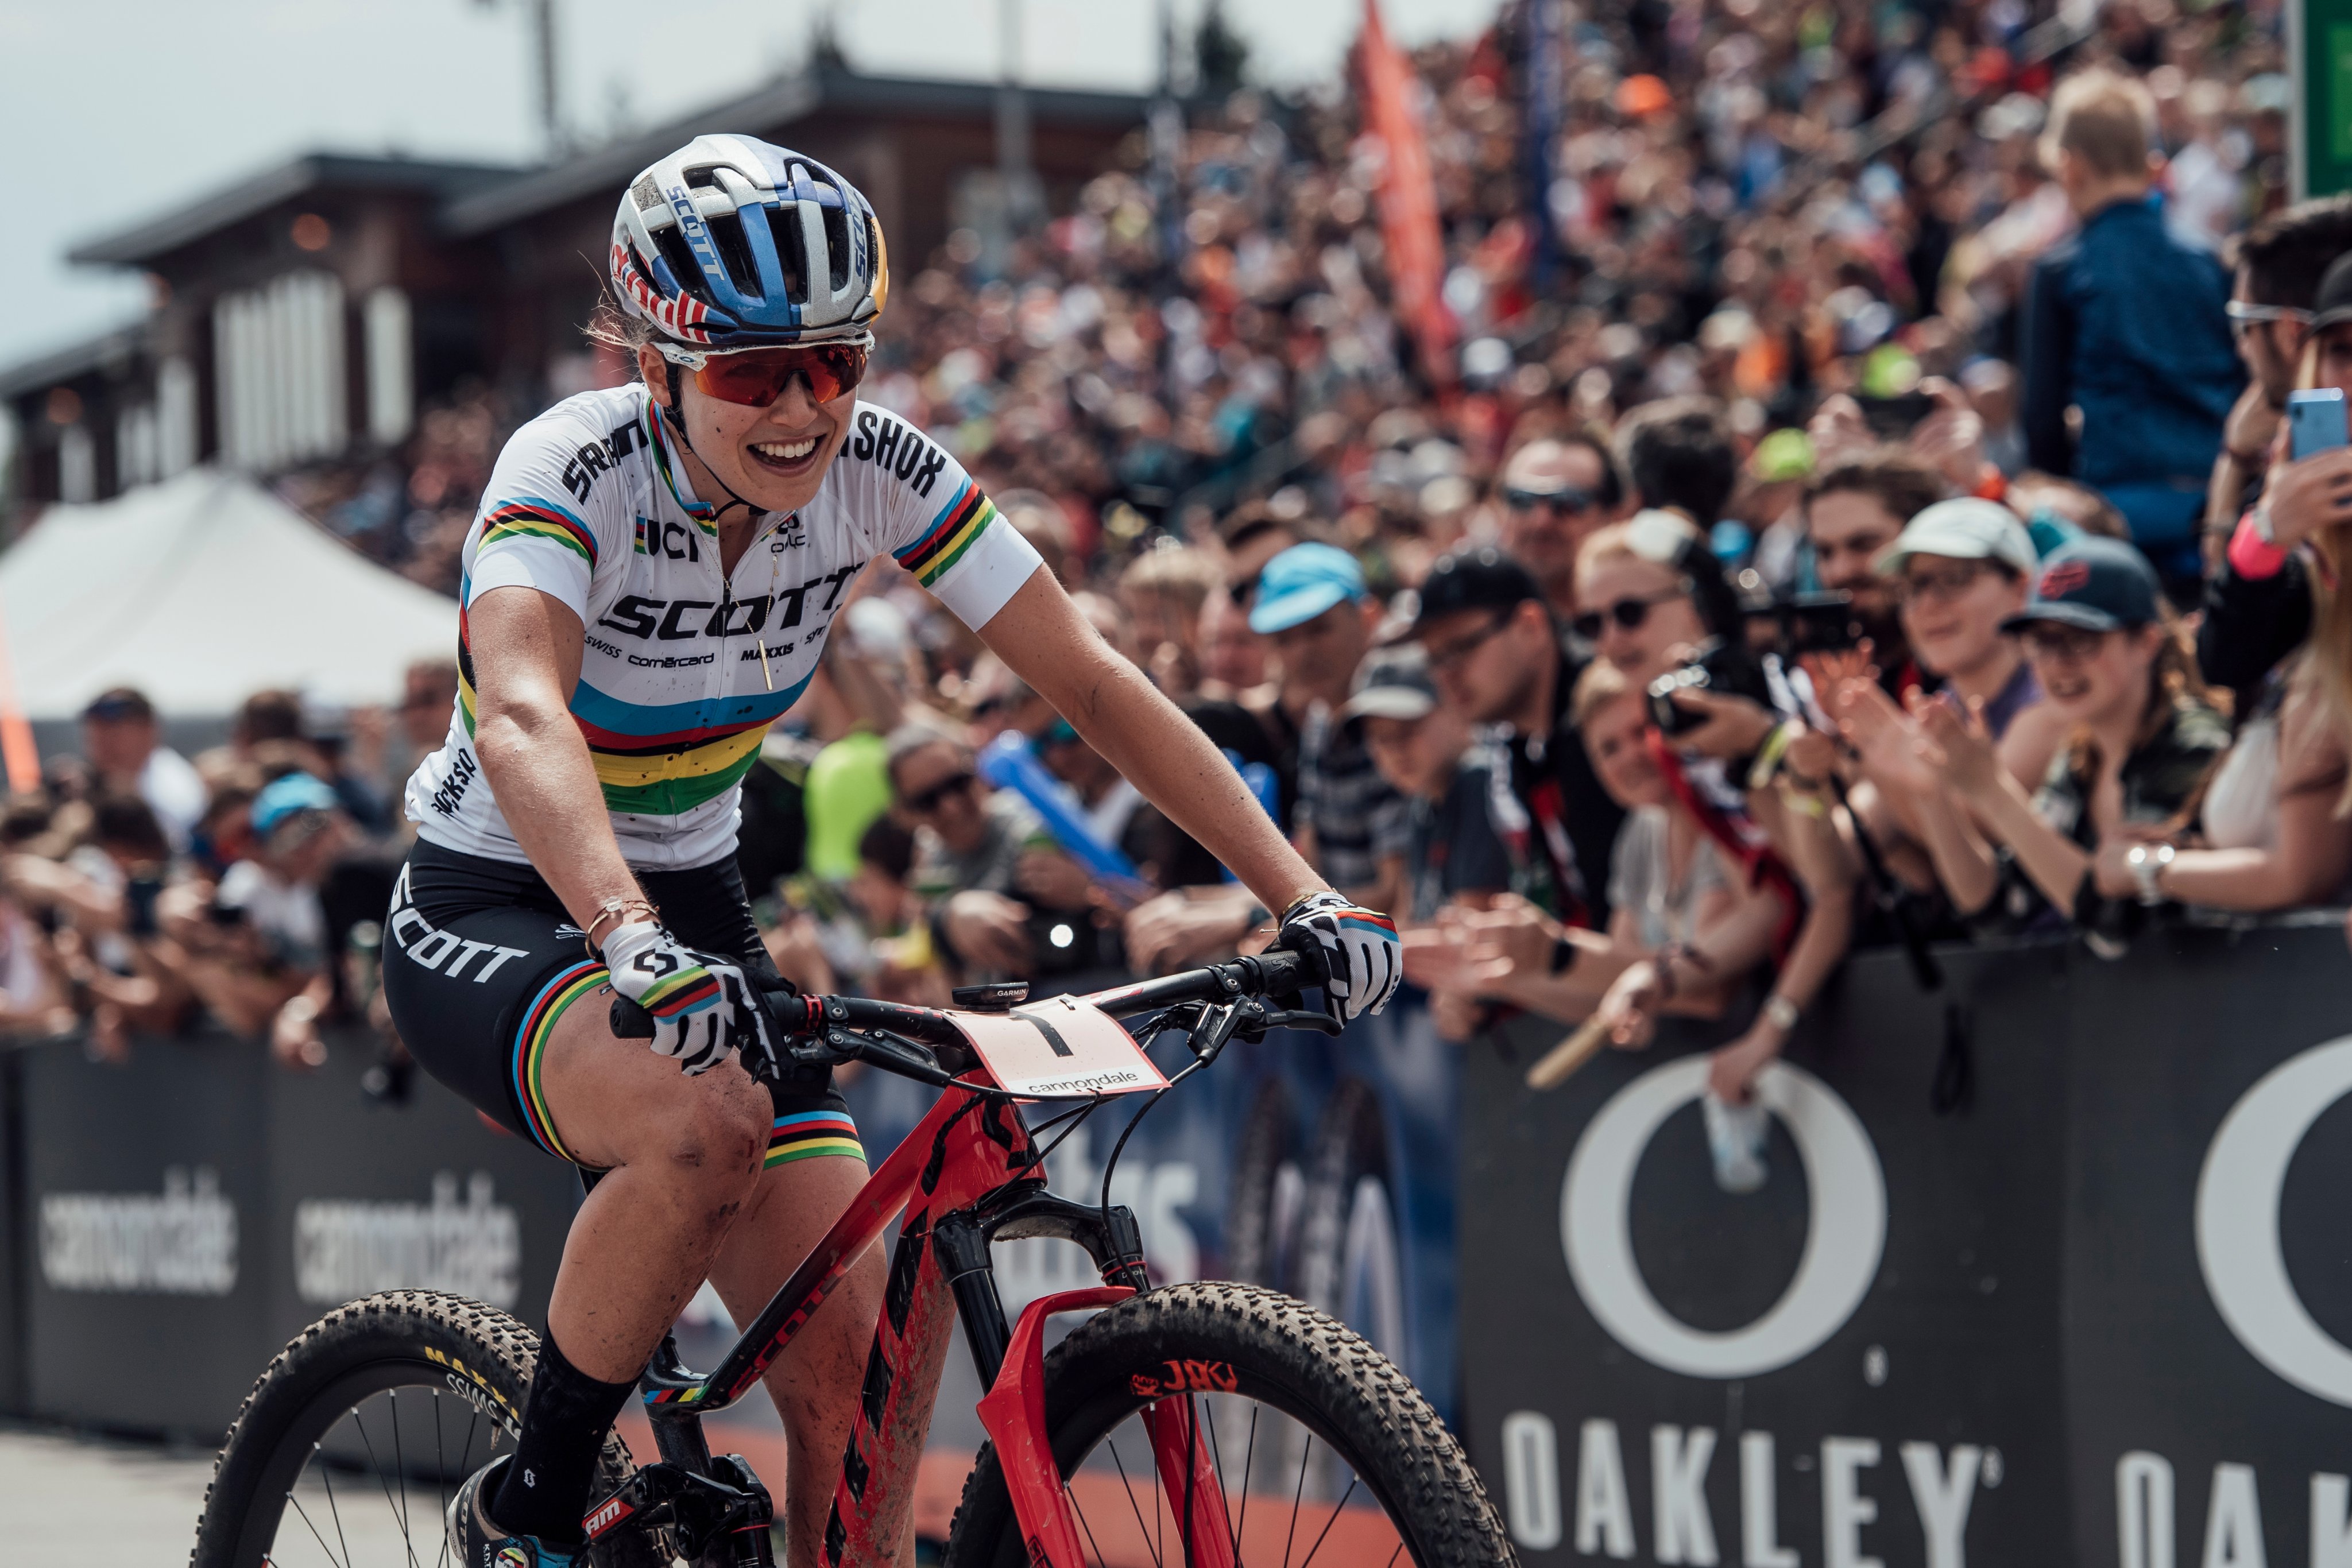 Red Bull on Twitter: "Charging Kate Courtney for a back-to-back #UCI #XCO World Cup WIN today. Congrats, Kate! #mtb #race #worldcup #mtblife #bike #redbull https://t.co/5k5G36zrZi" / Twitter